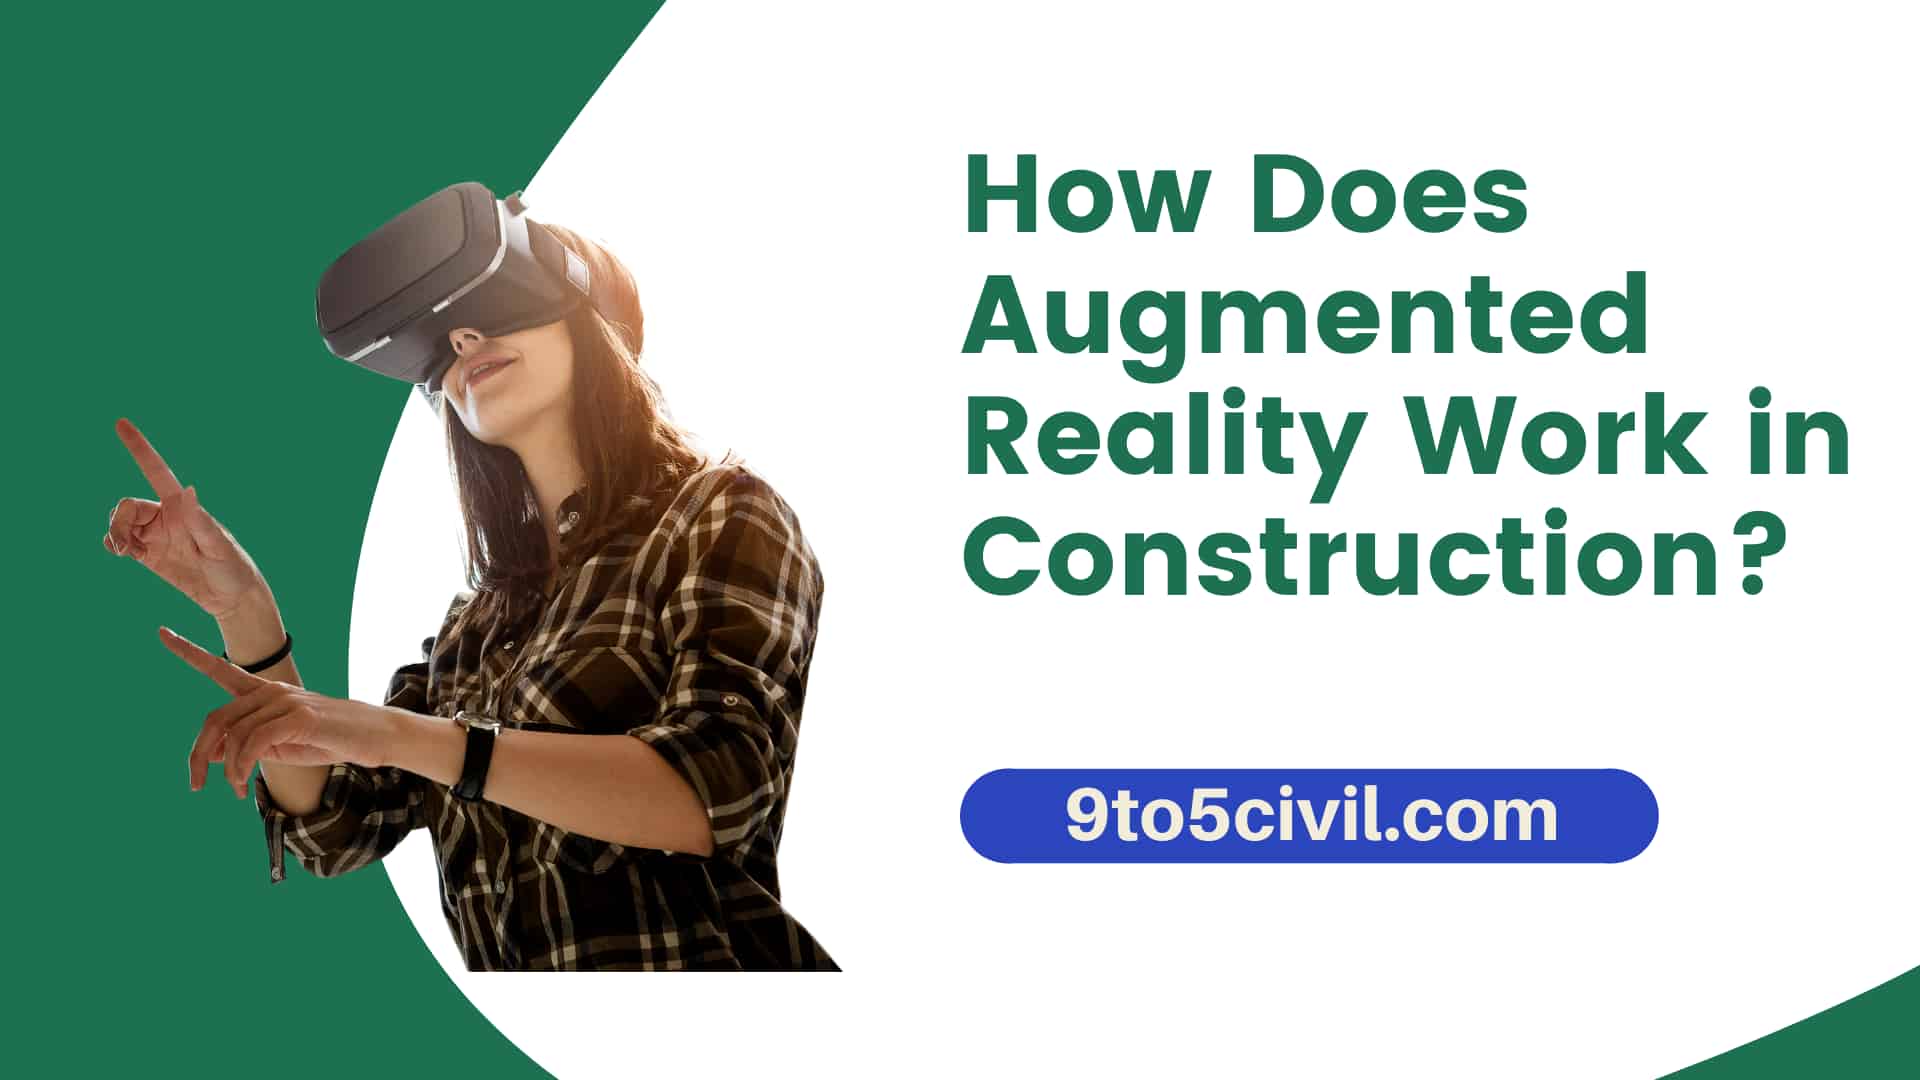 How Does Augmented Reality Work in Construction